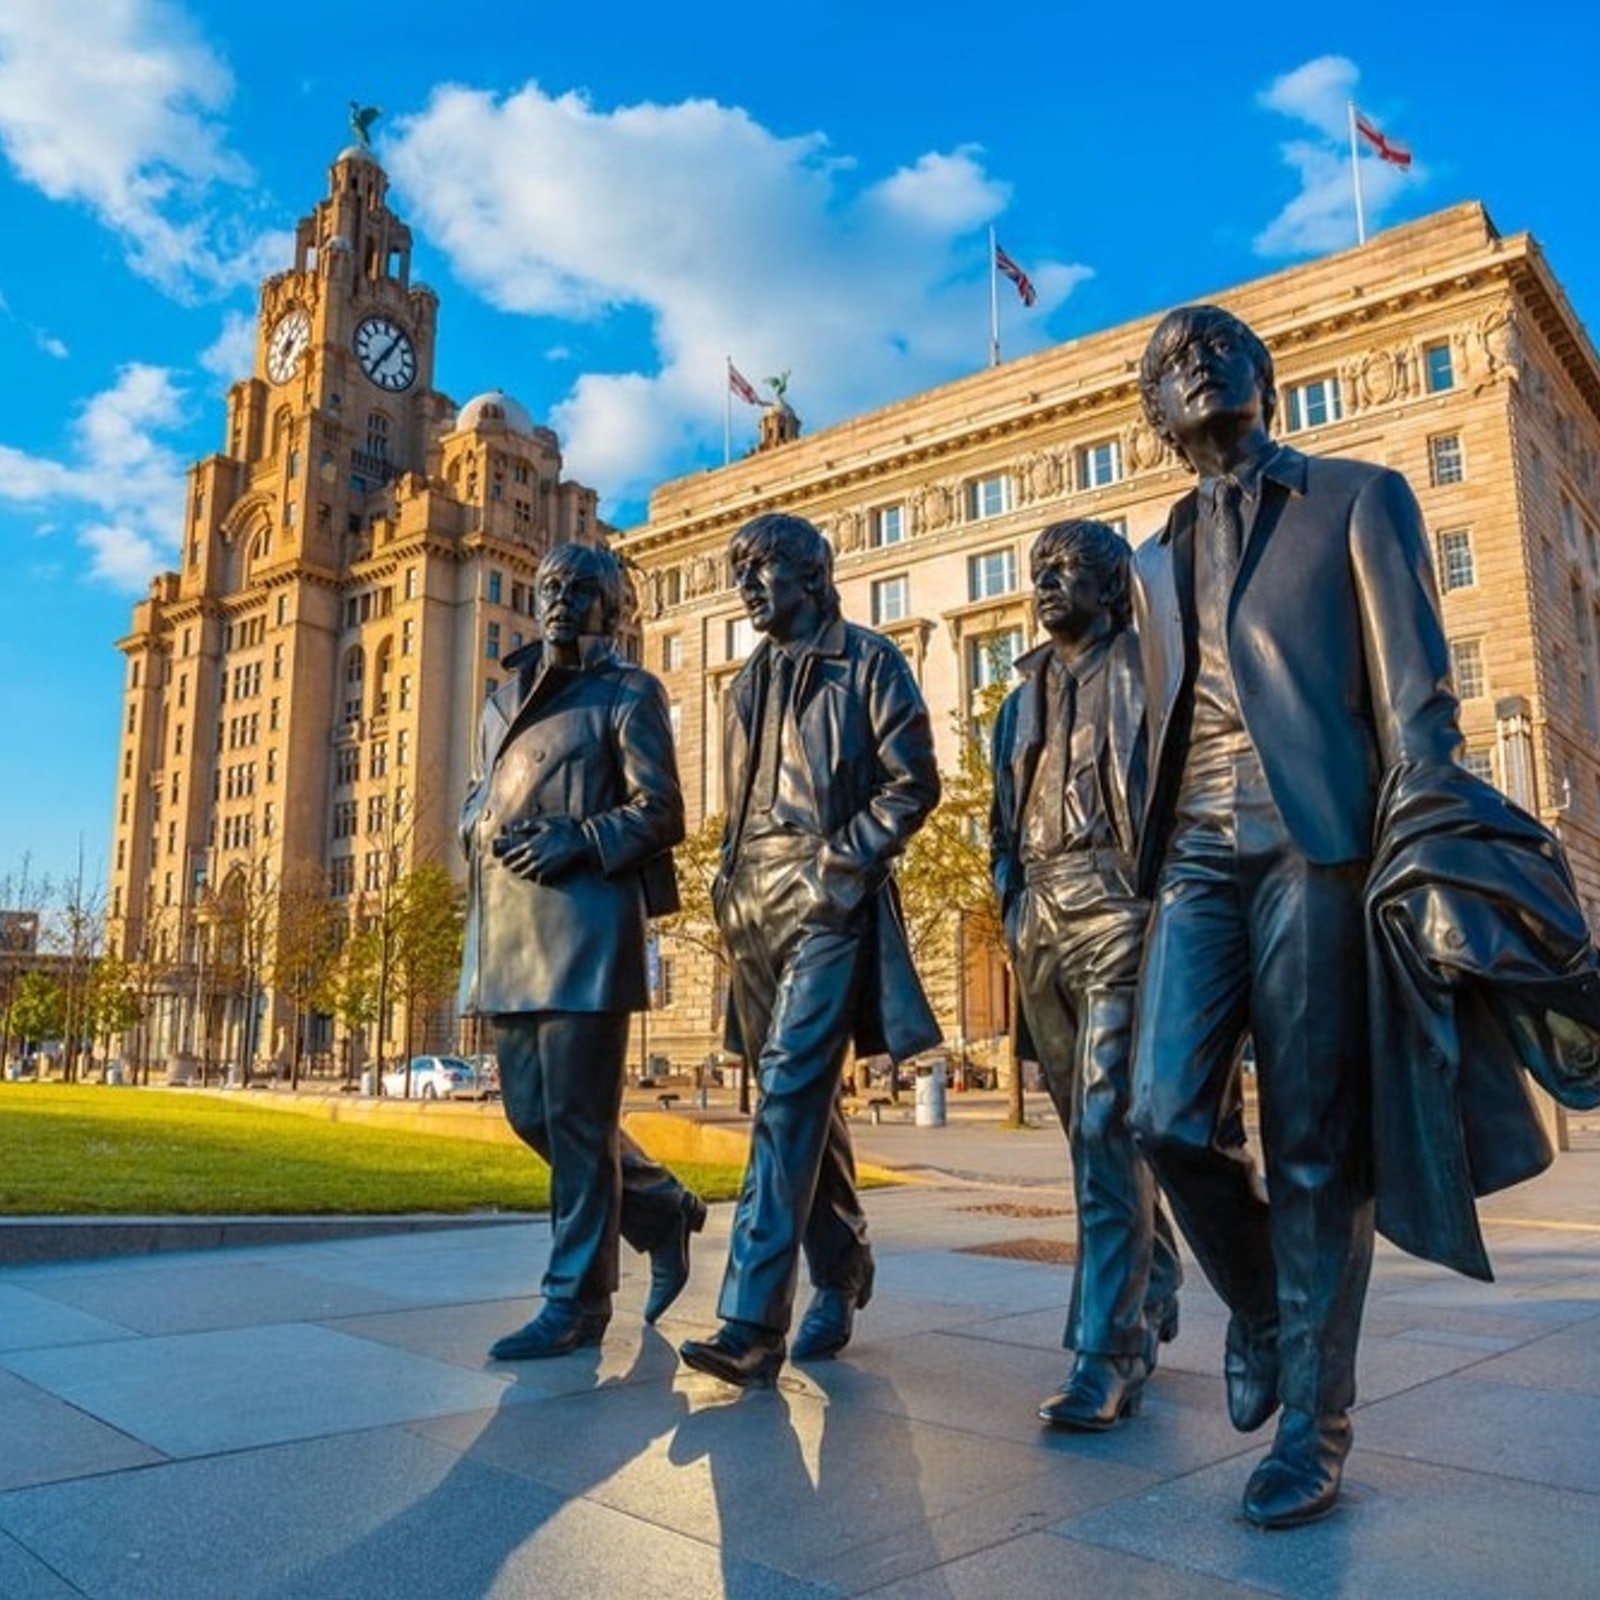 Liverpool City Centre Walking Tour in United Kingdom